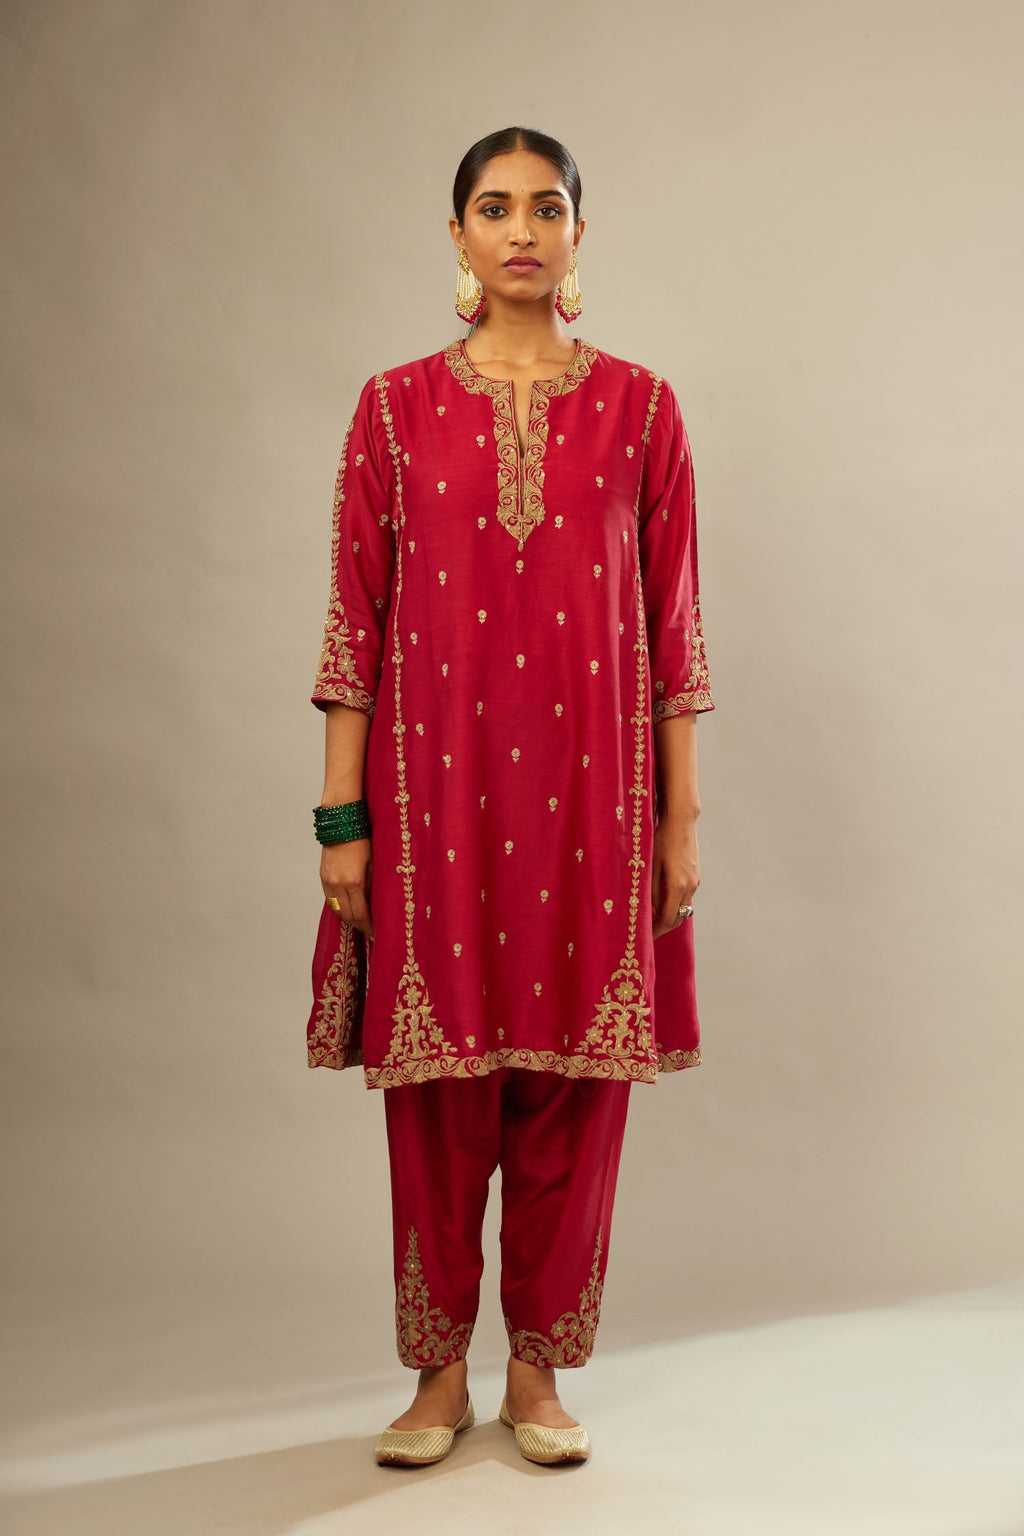 Fuchsia silk chanderi short kalidar kurta set with all-over delicate zari bootis, detailed with dori embroidery and gold sequin work.